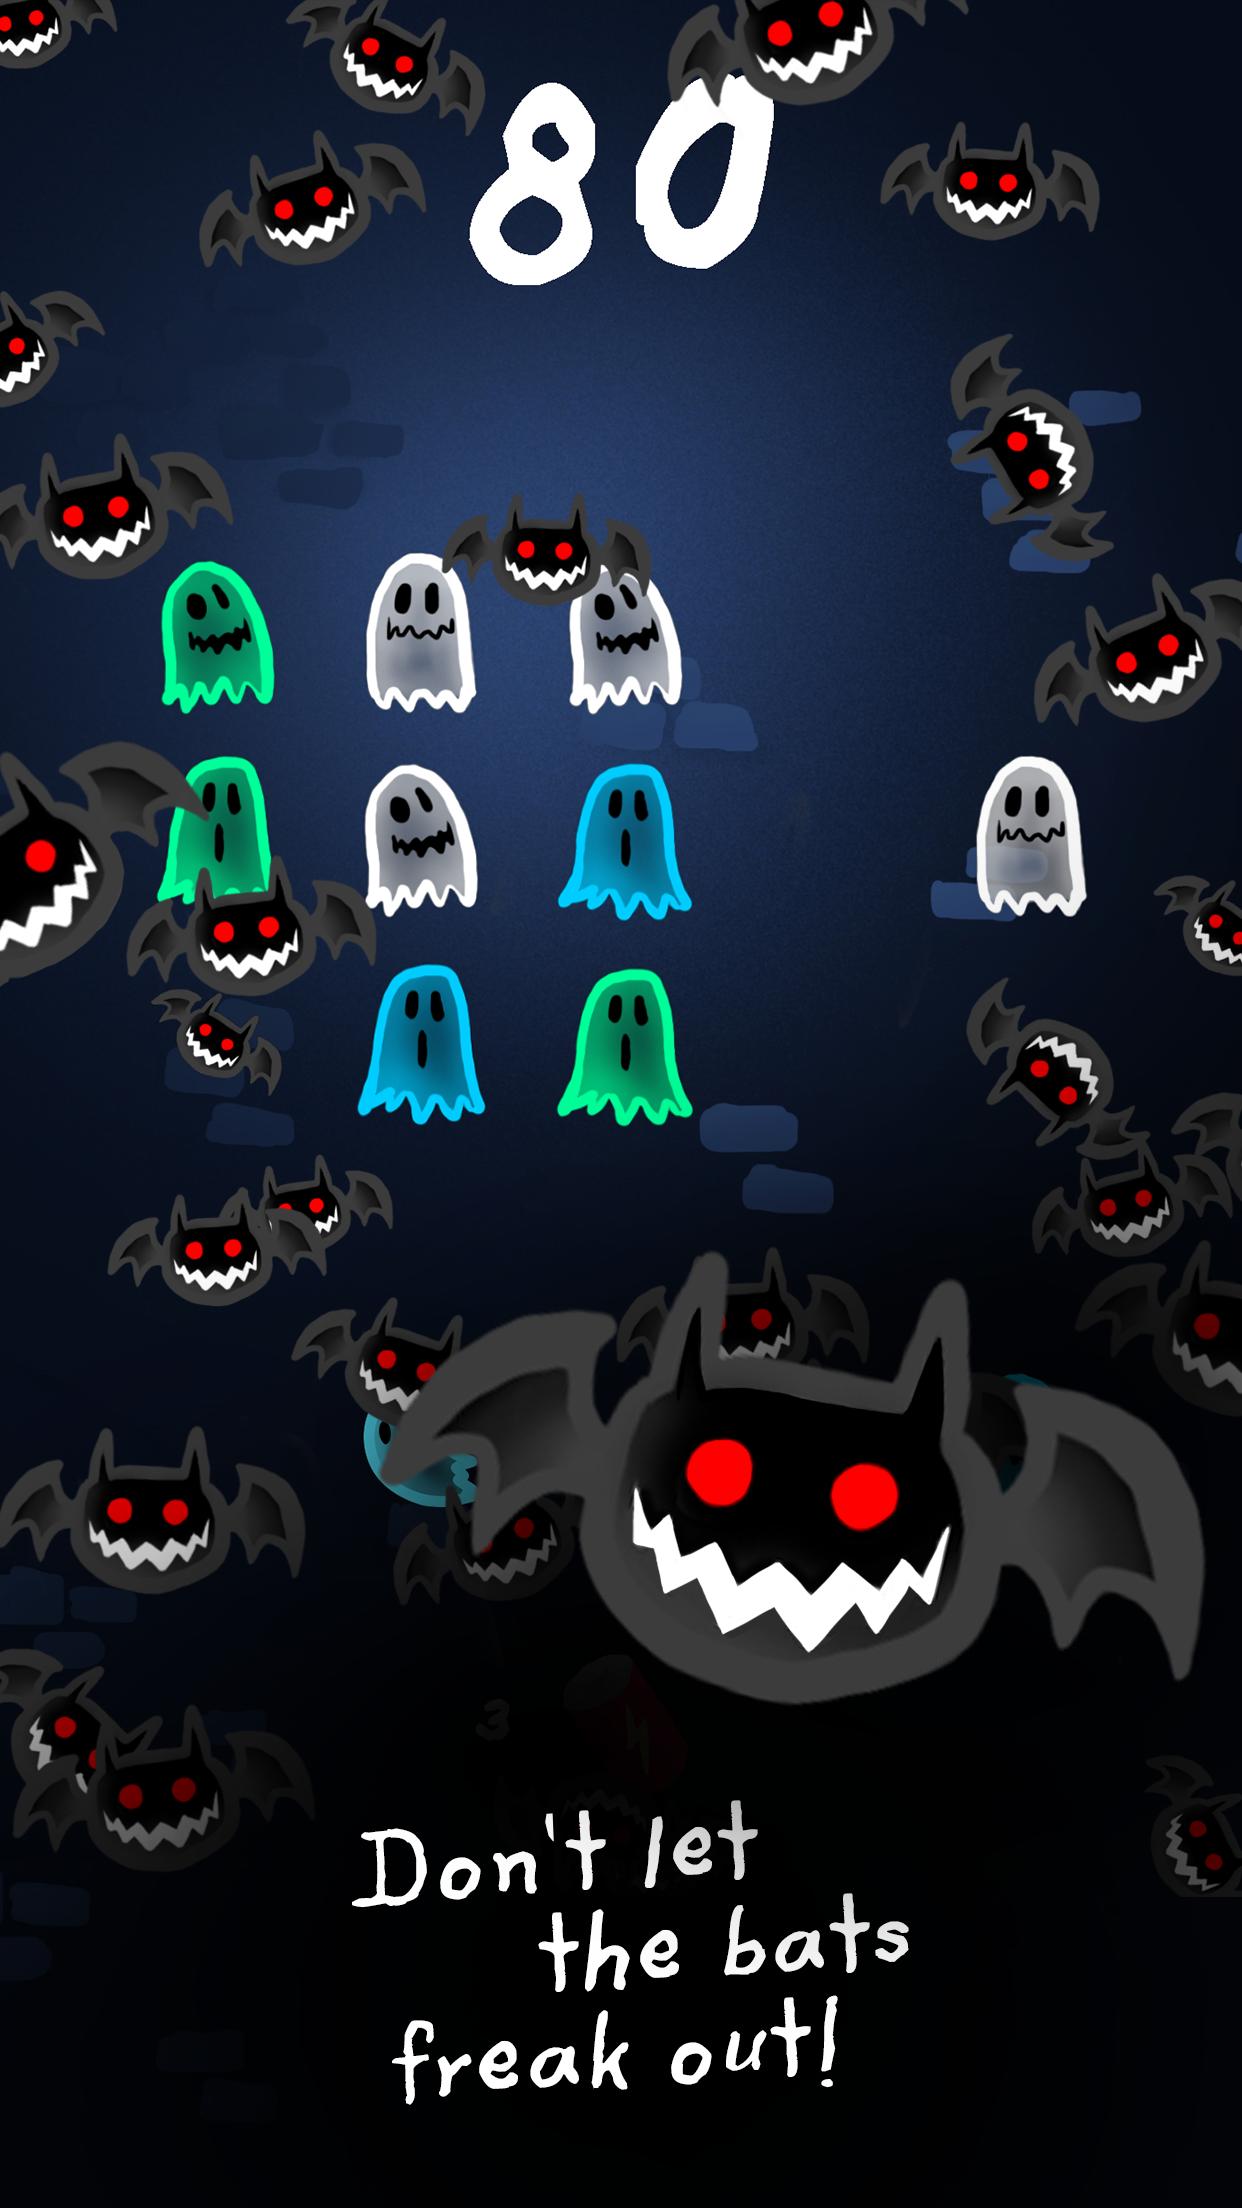 Spooky Boo for Android - APK Download